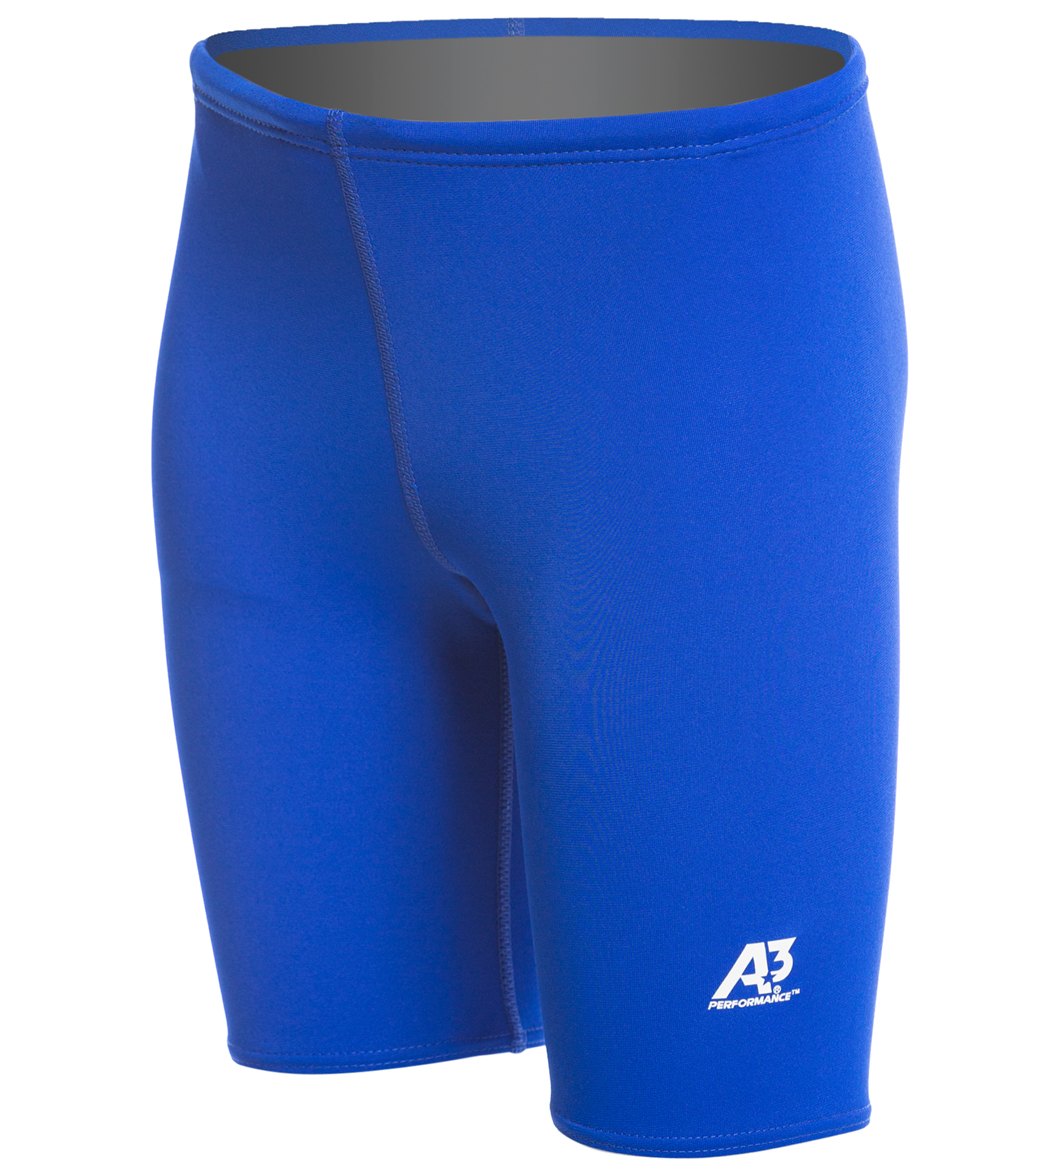 A3 Performance Poly Youth Jammer Swimsuit at SwimOutlet.com